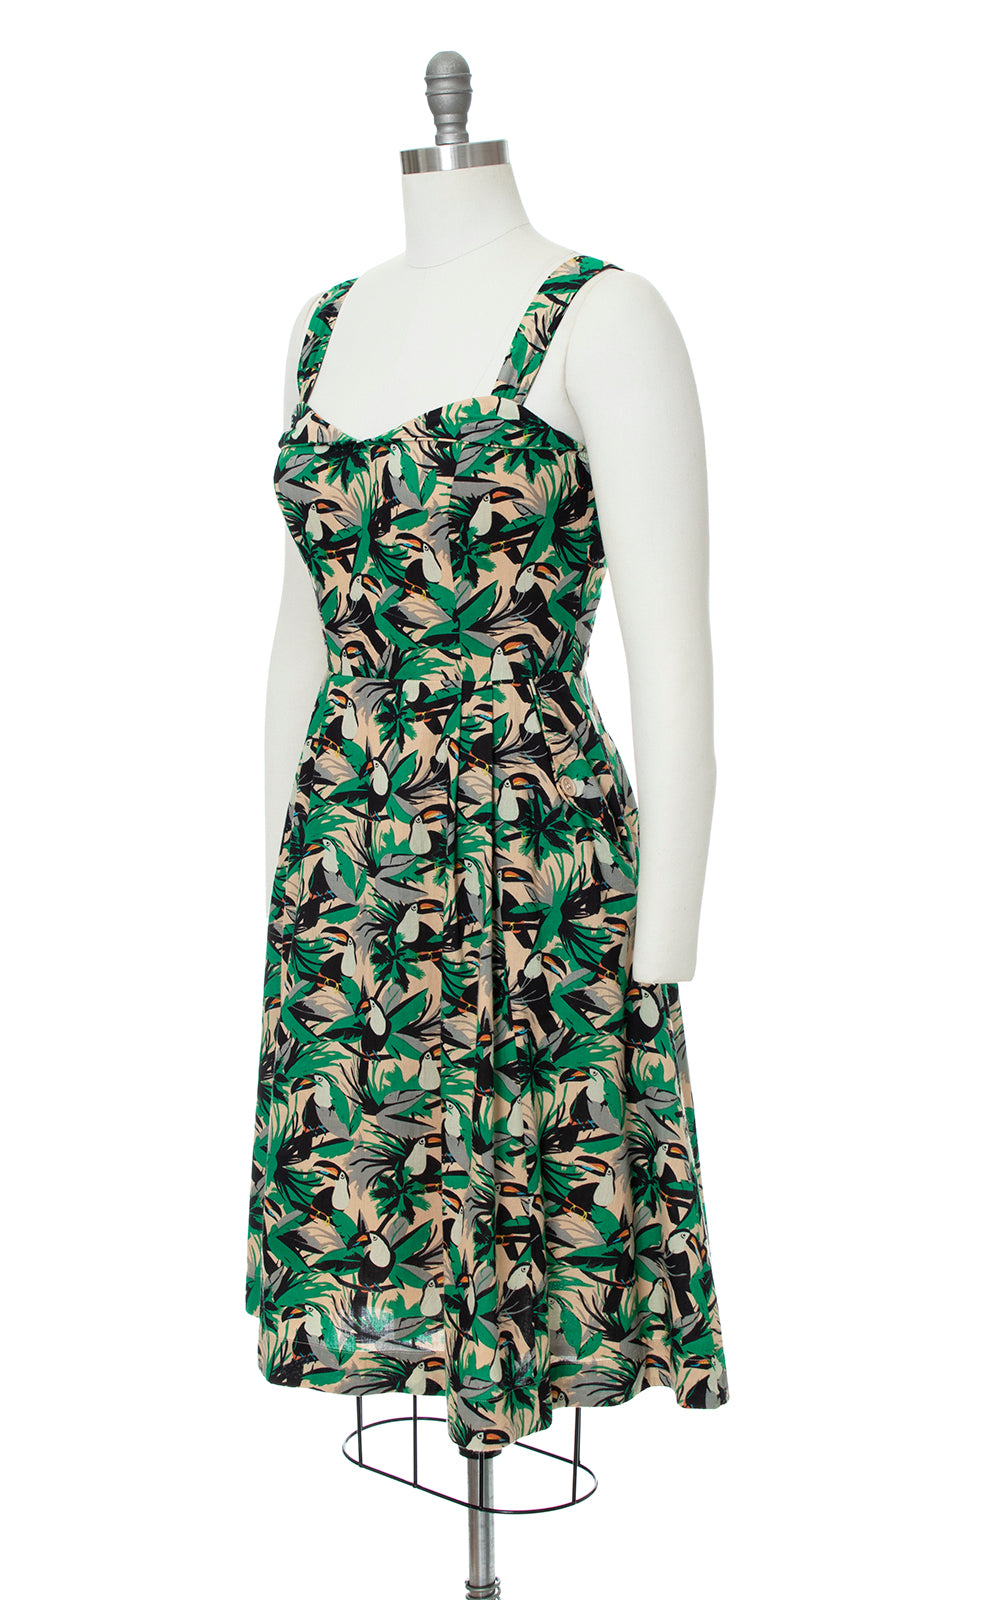 Modern 1950s Style EMILY AND FIN Toucan Novelty Print Sundress with Pockets | small